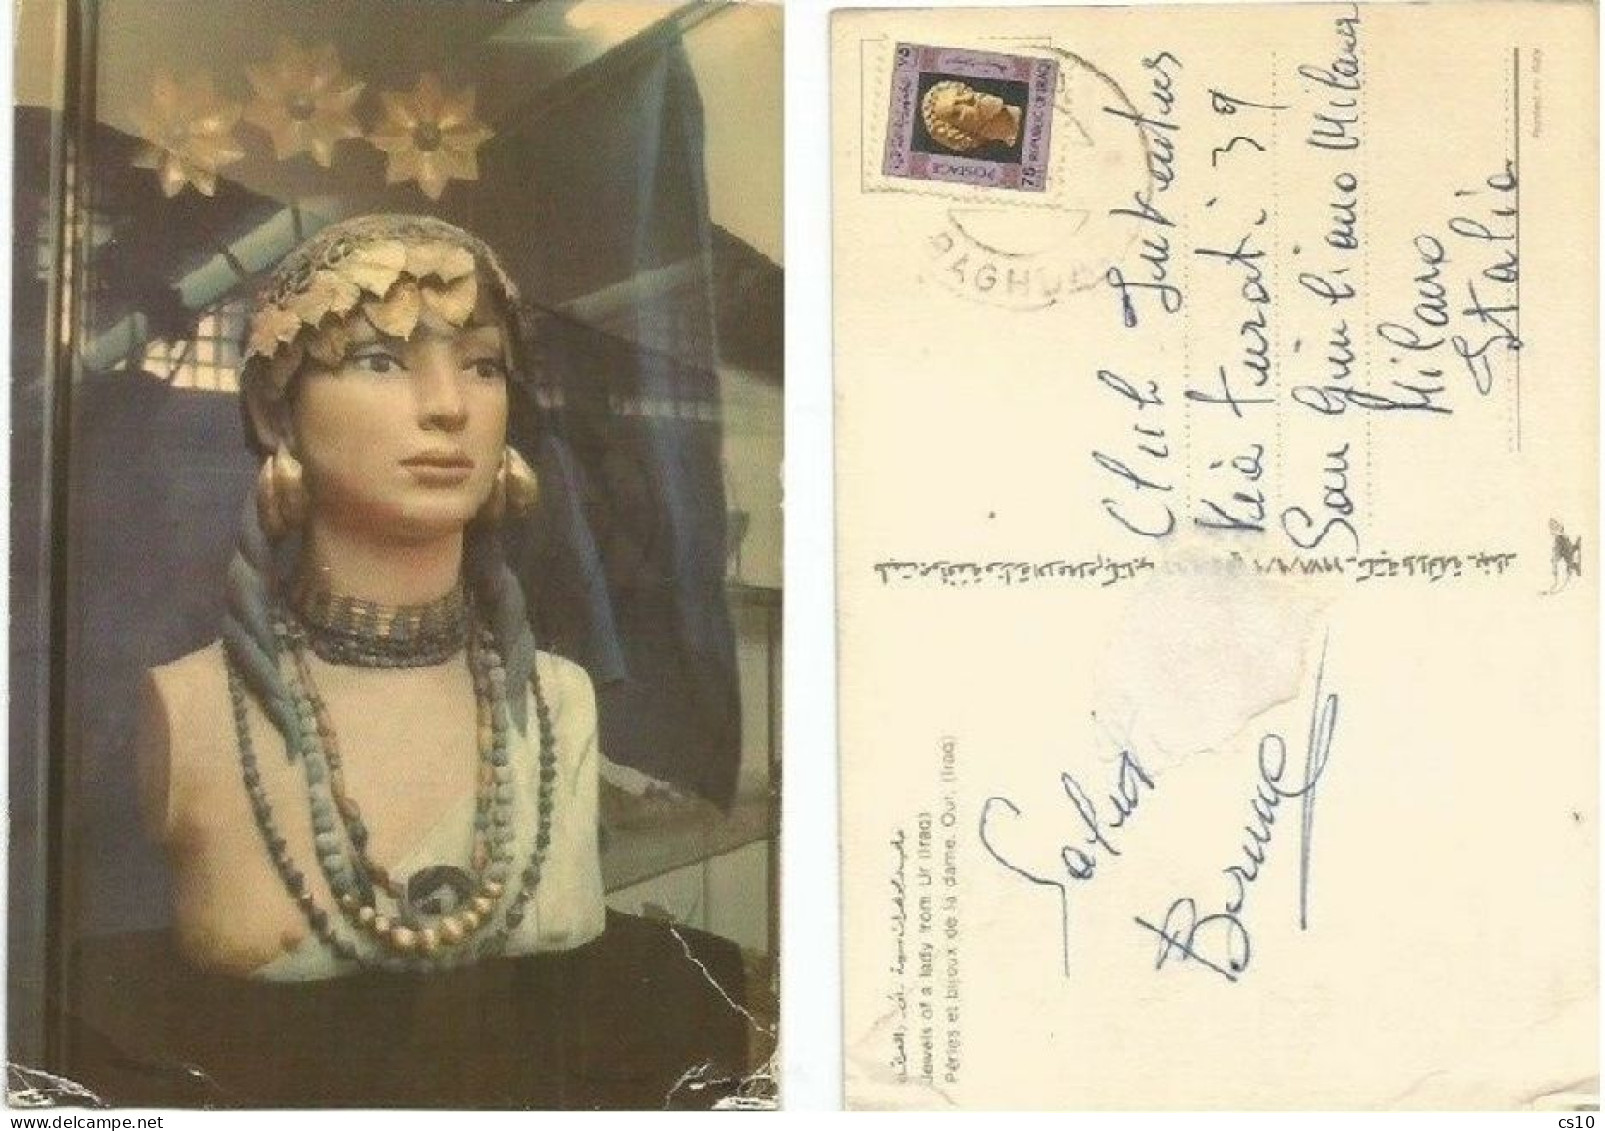 Iraq Irak Jewels Of A Lady From UR - Pcard Used Late 70's To Italy - Iraq